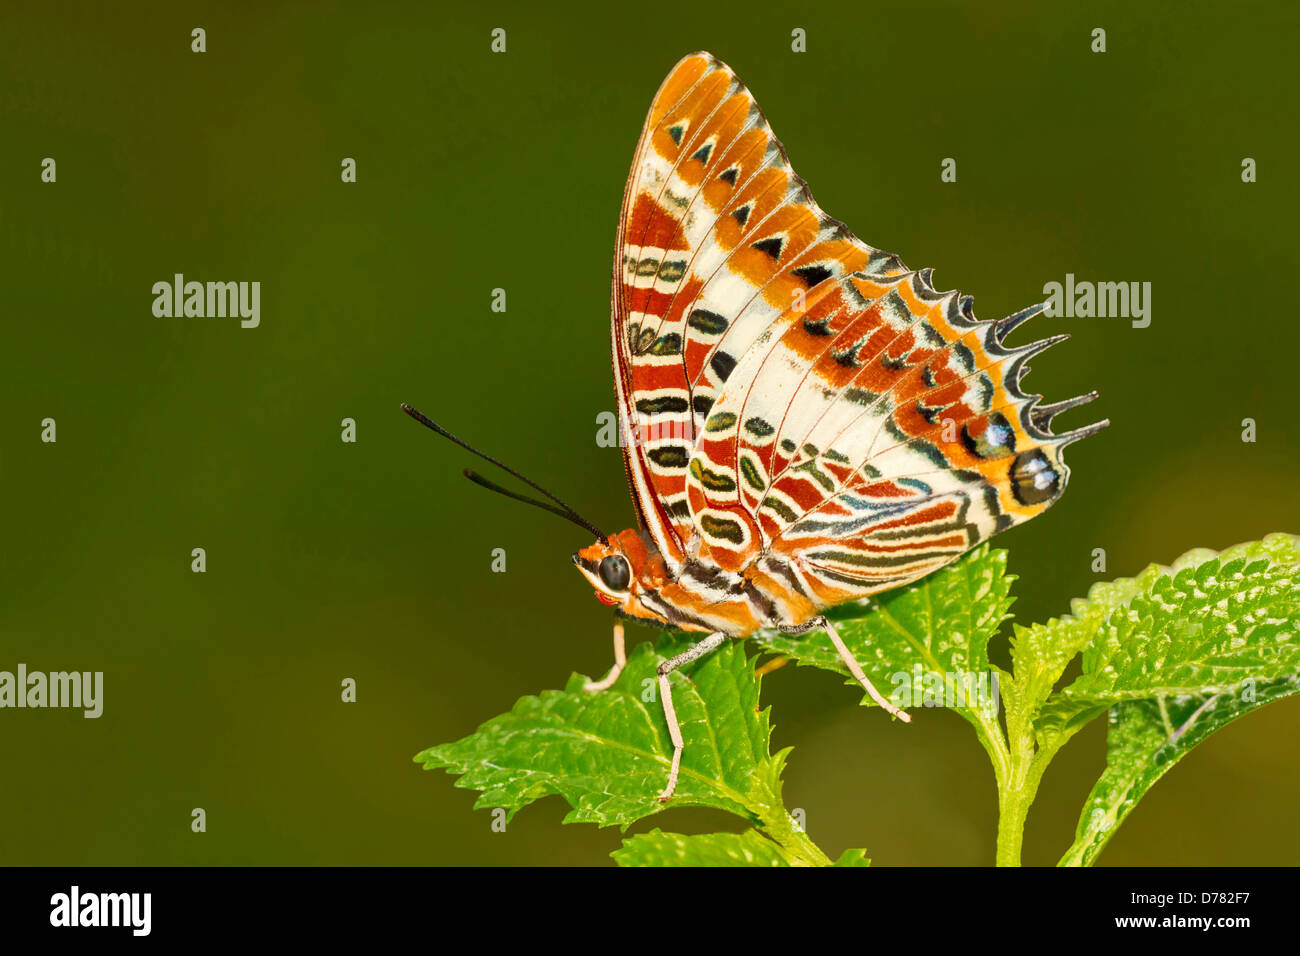 White-barred charaxes butterfly Charaxes brutus perched on green leaf Stock Photo